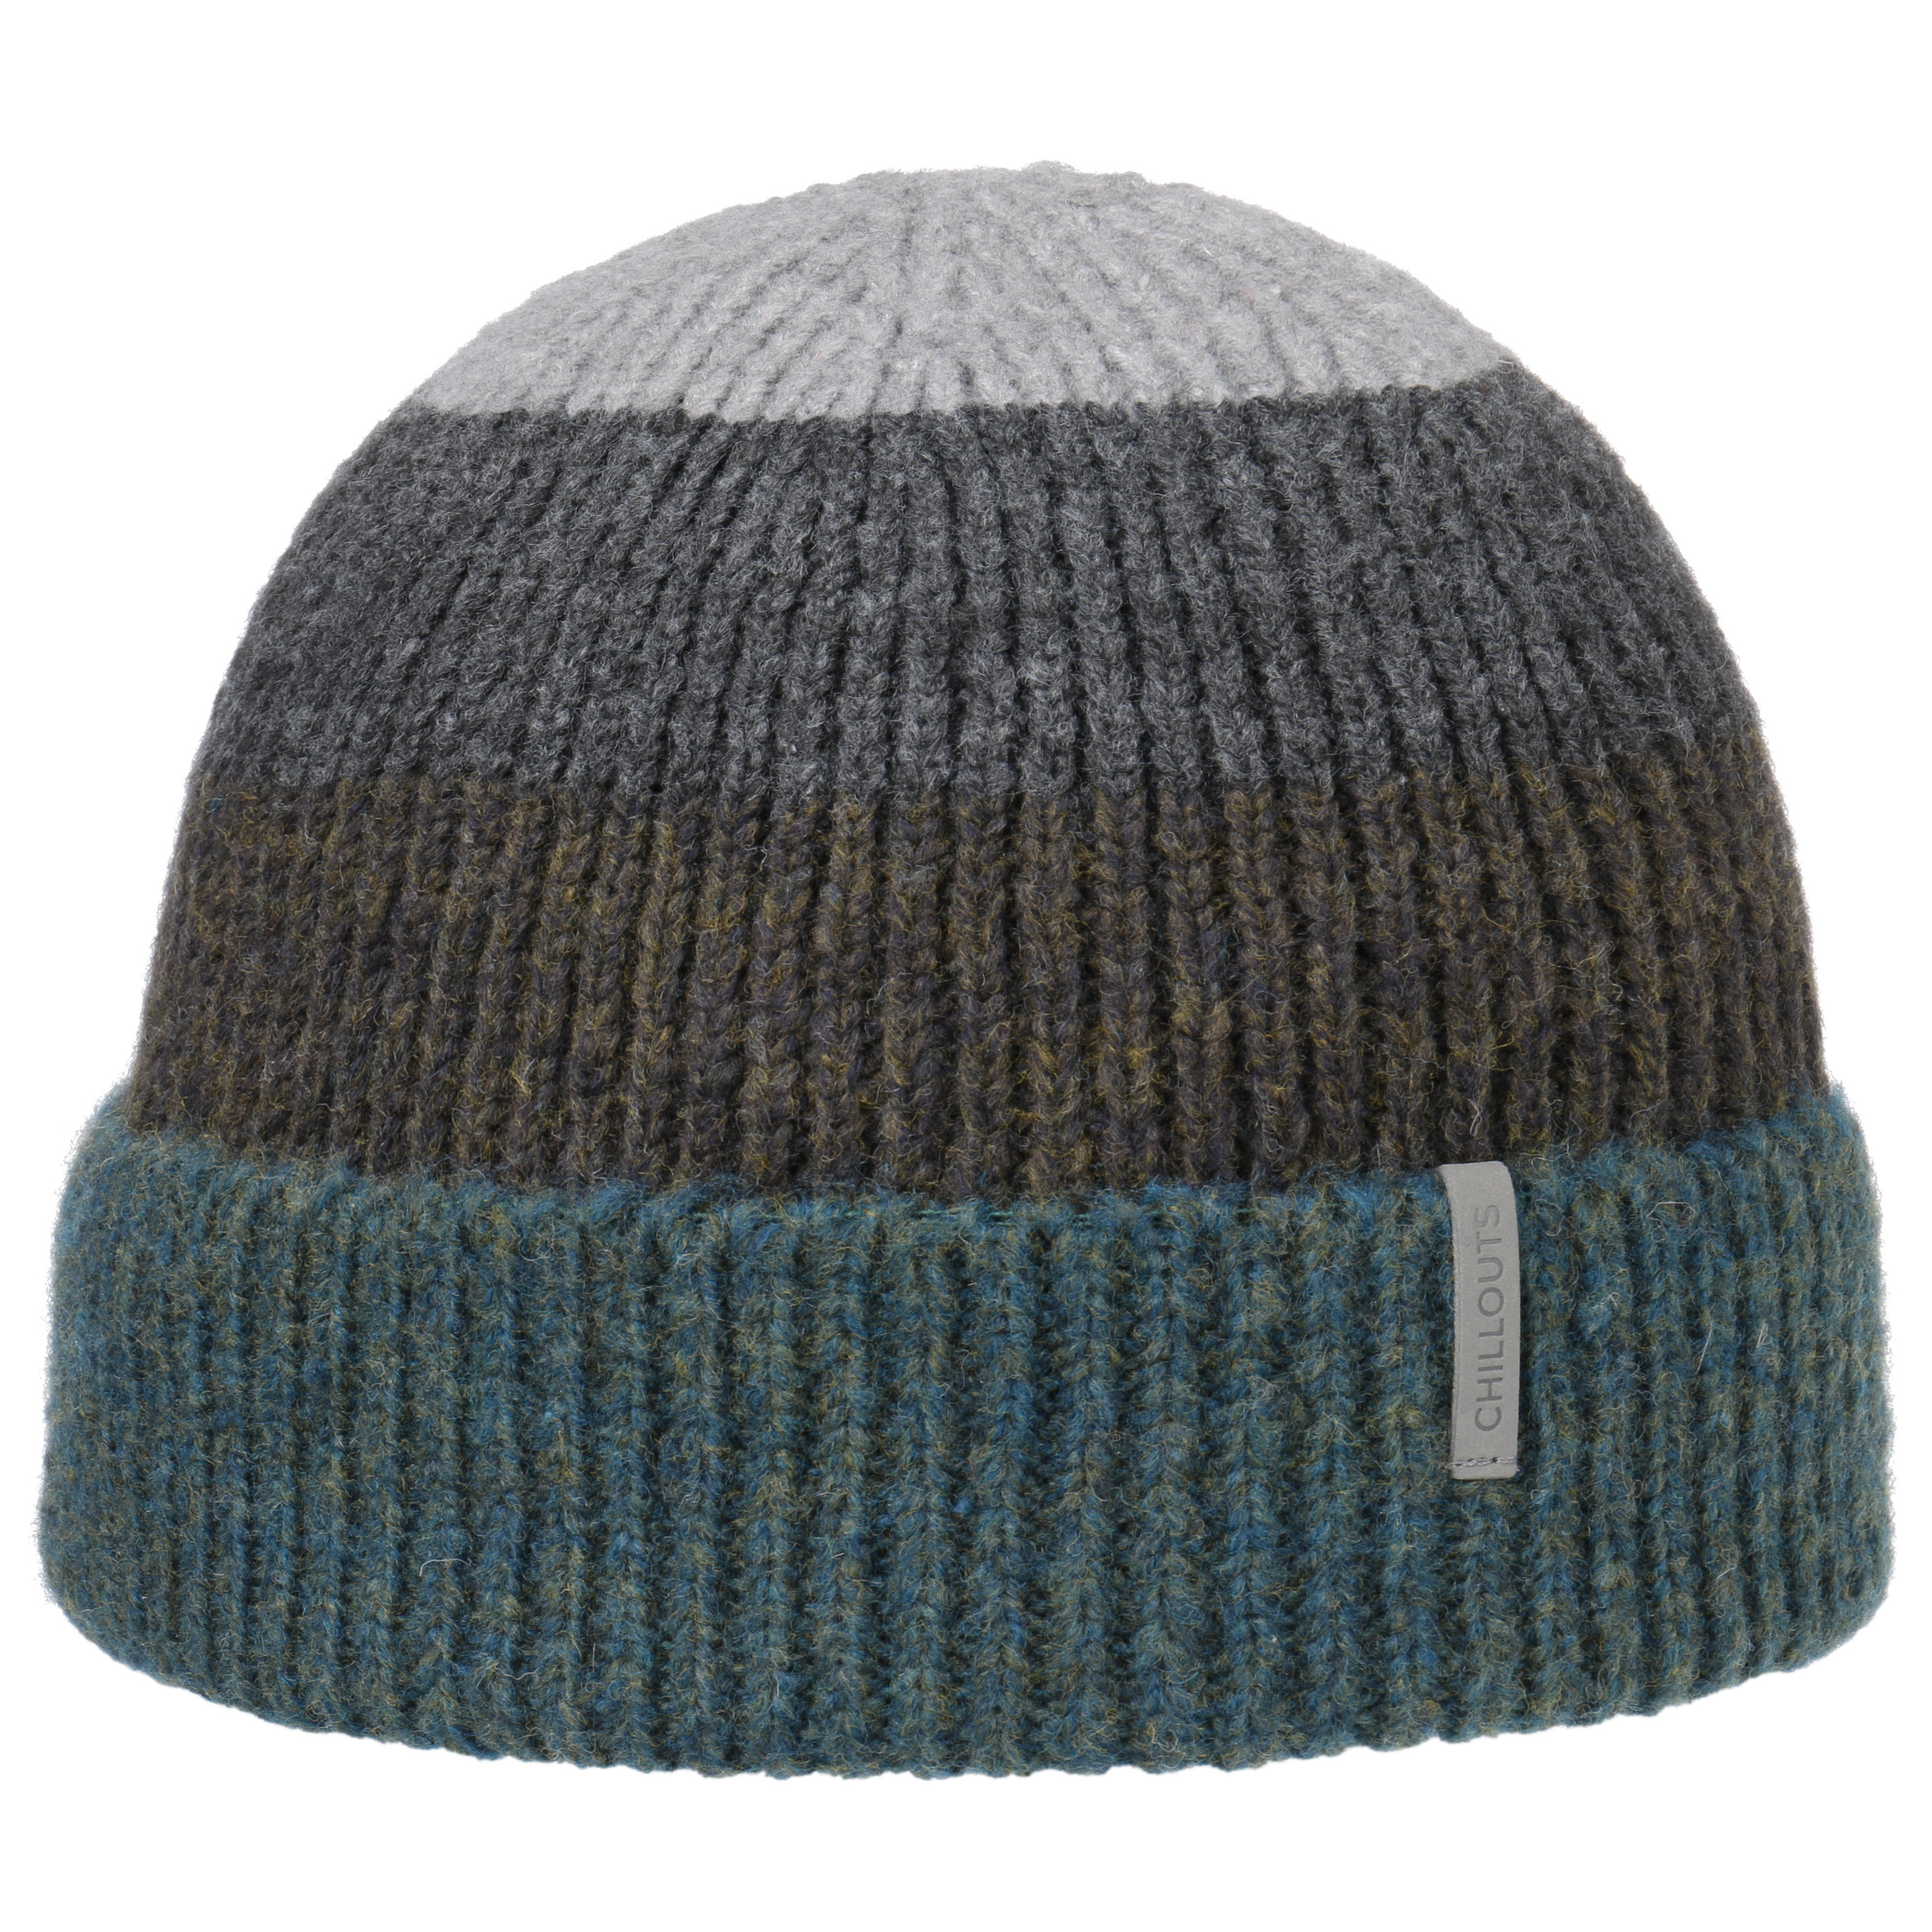 Fritz Beanie - 24,99 Chillouts € by